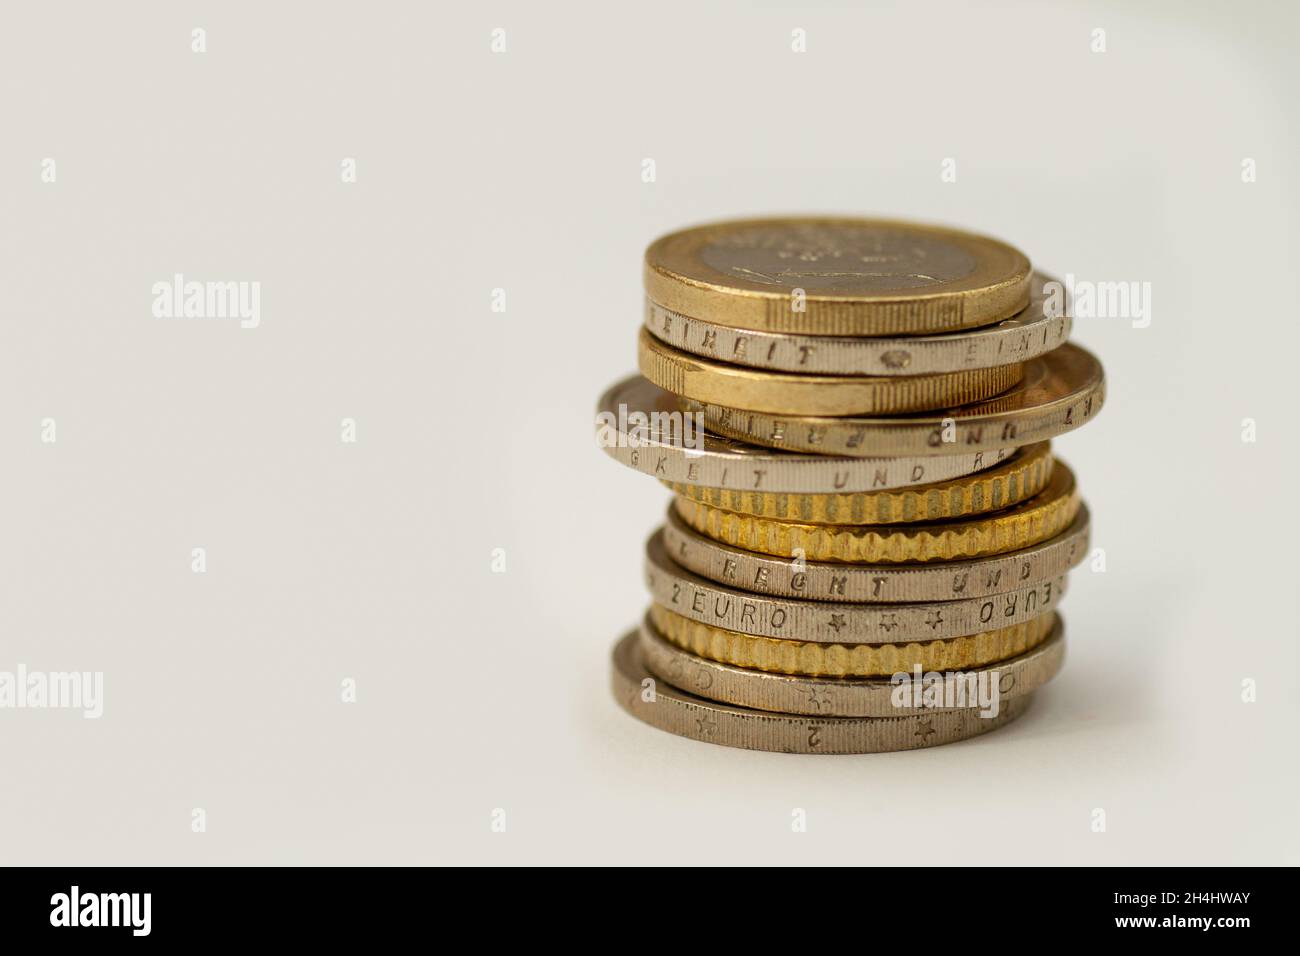 Coin stack with euro coins isolated on white background Stock Photo